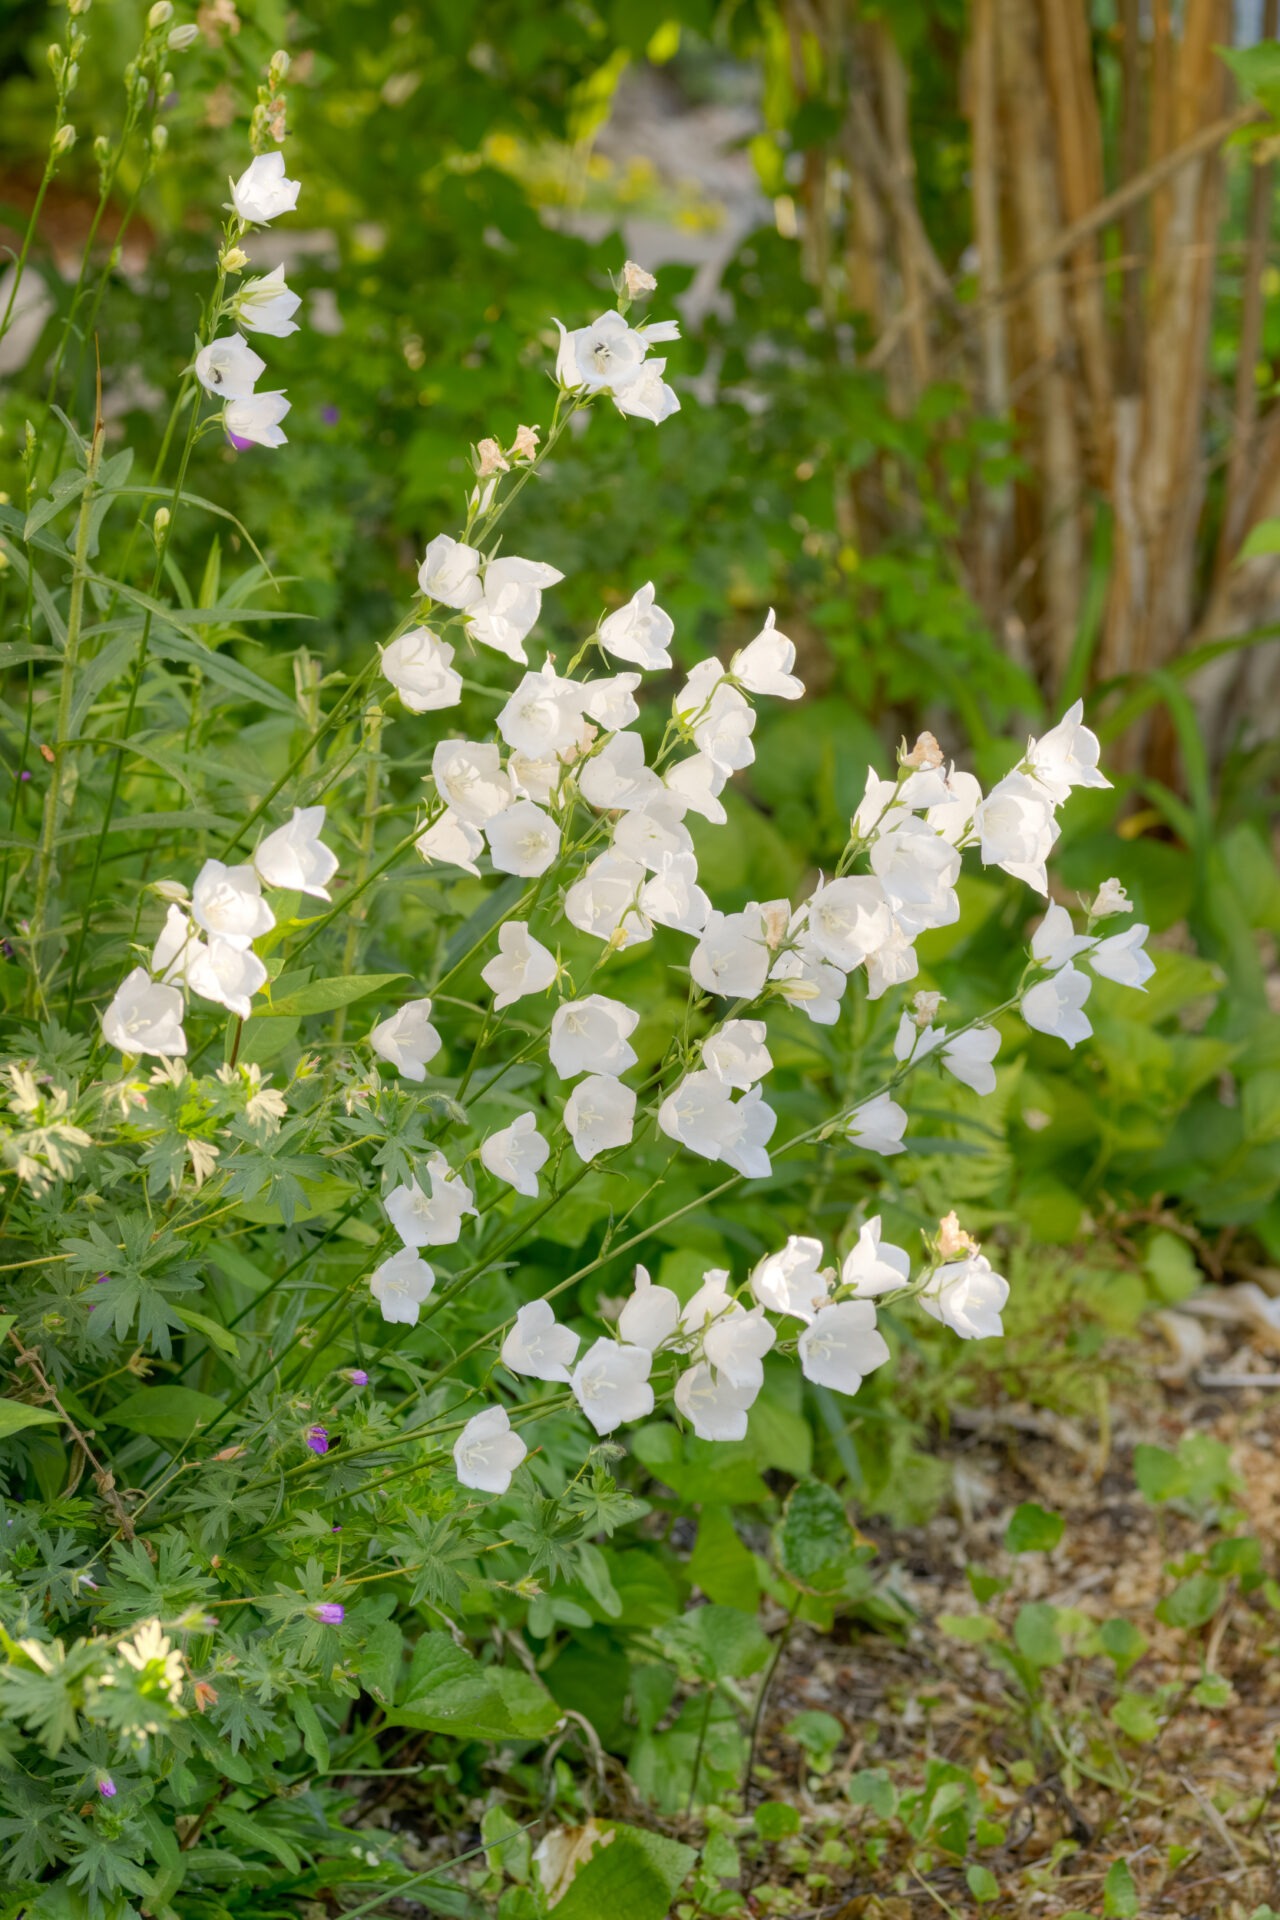 A cluster of delicate white bell-shaped flowers bloom amidst lush green foliage with scattered sunlight and a blurred background enhancing their elegance.